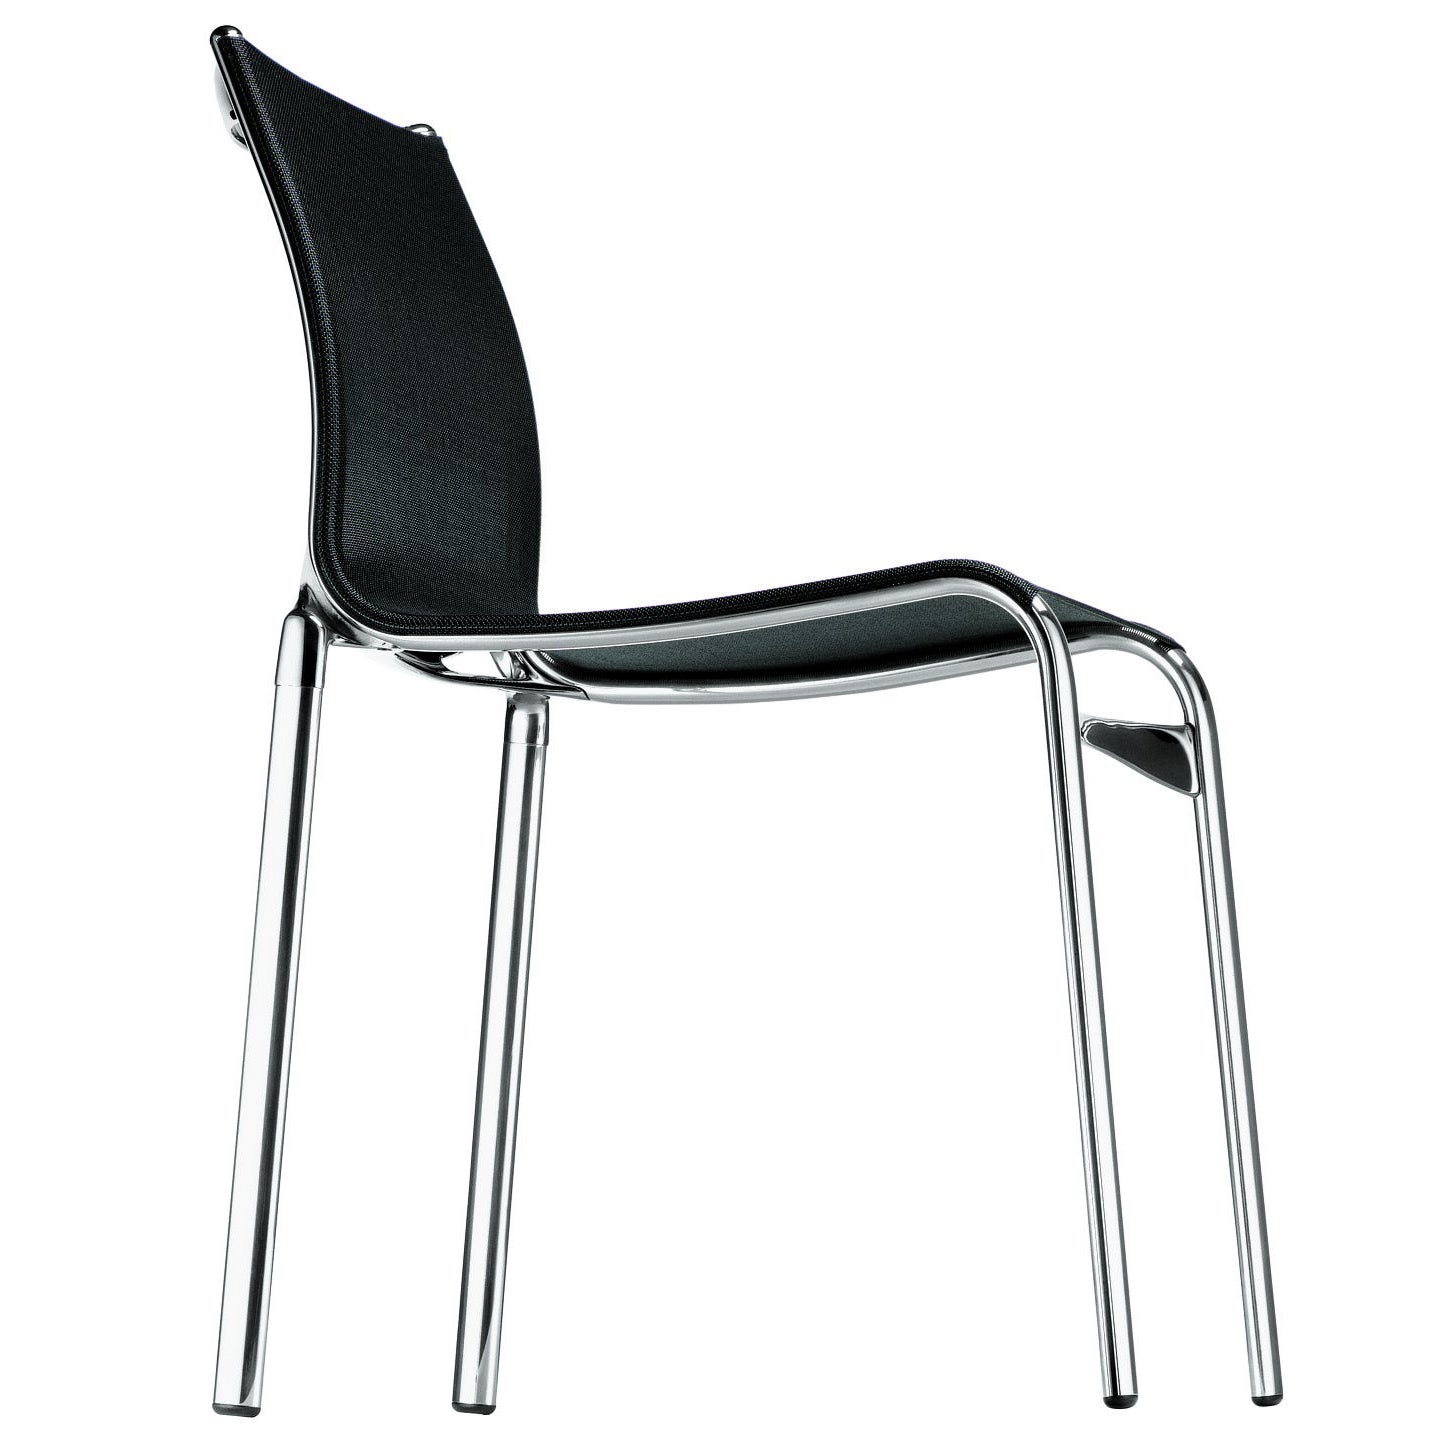 Alias Highframe 40 Chair in Black Mesh Seat with Polished Aluminium Frame For Sale